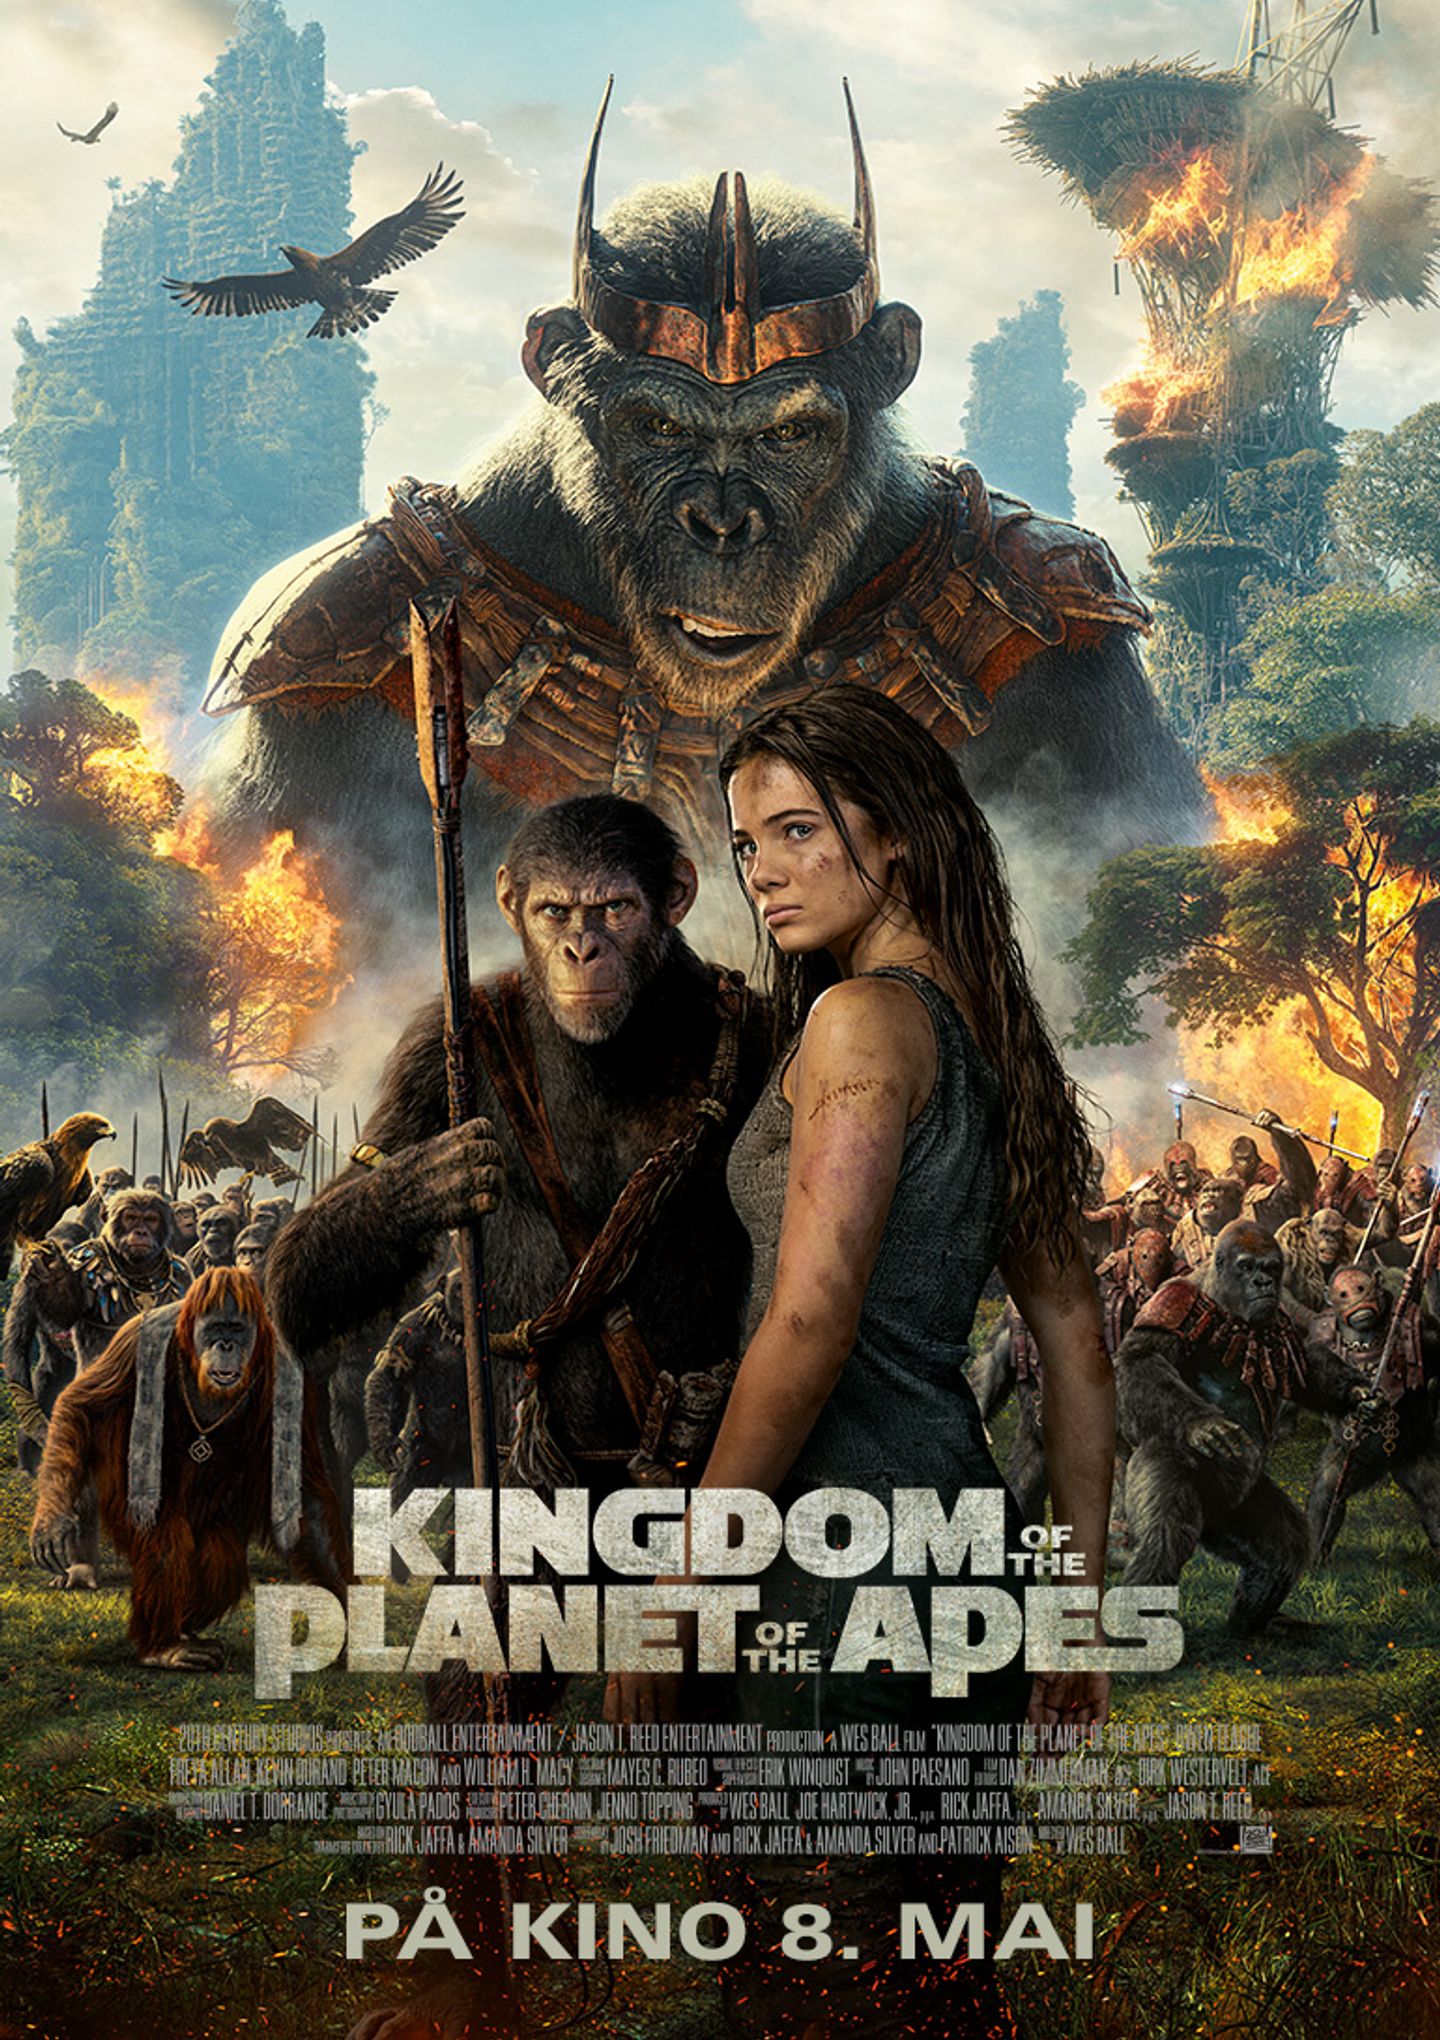 Plakat for 'Kingdom of the Planet of the Apes'